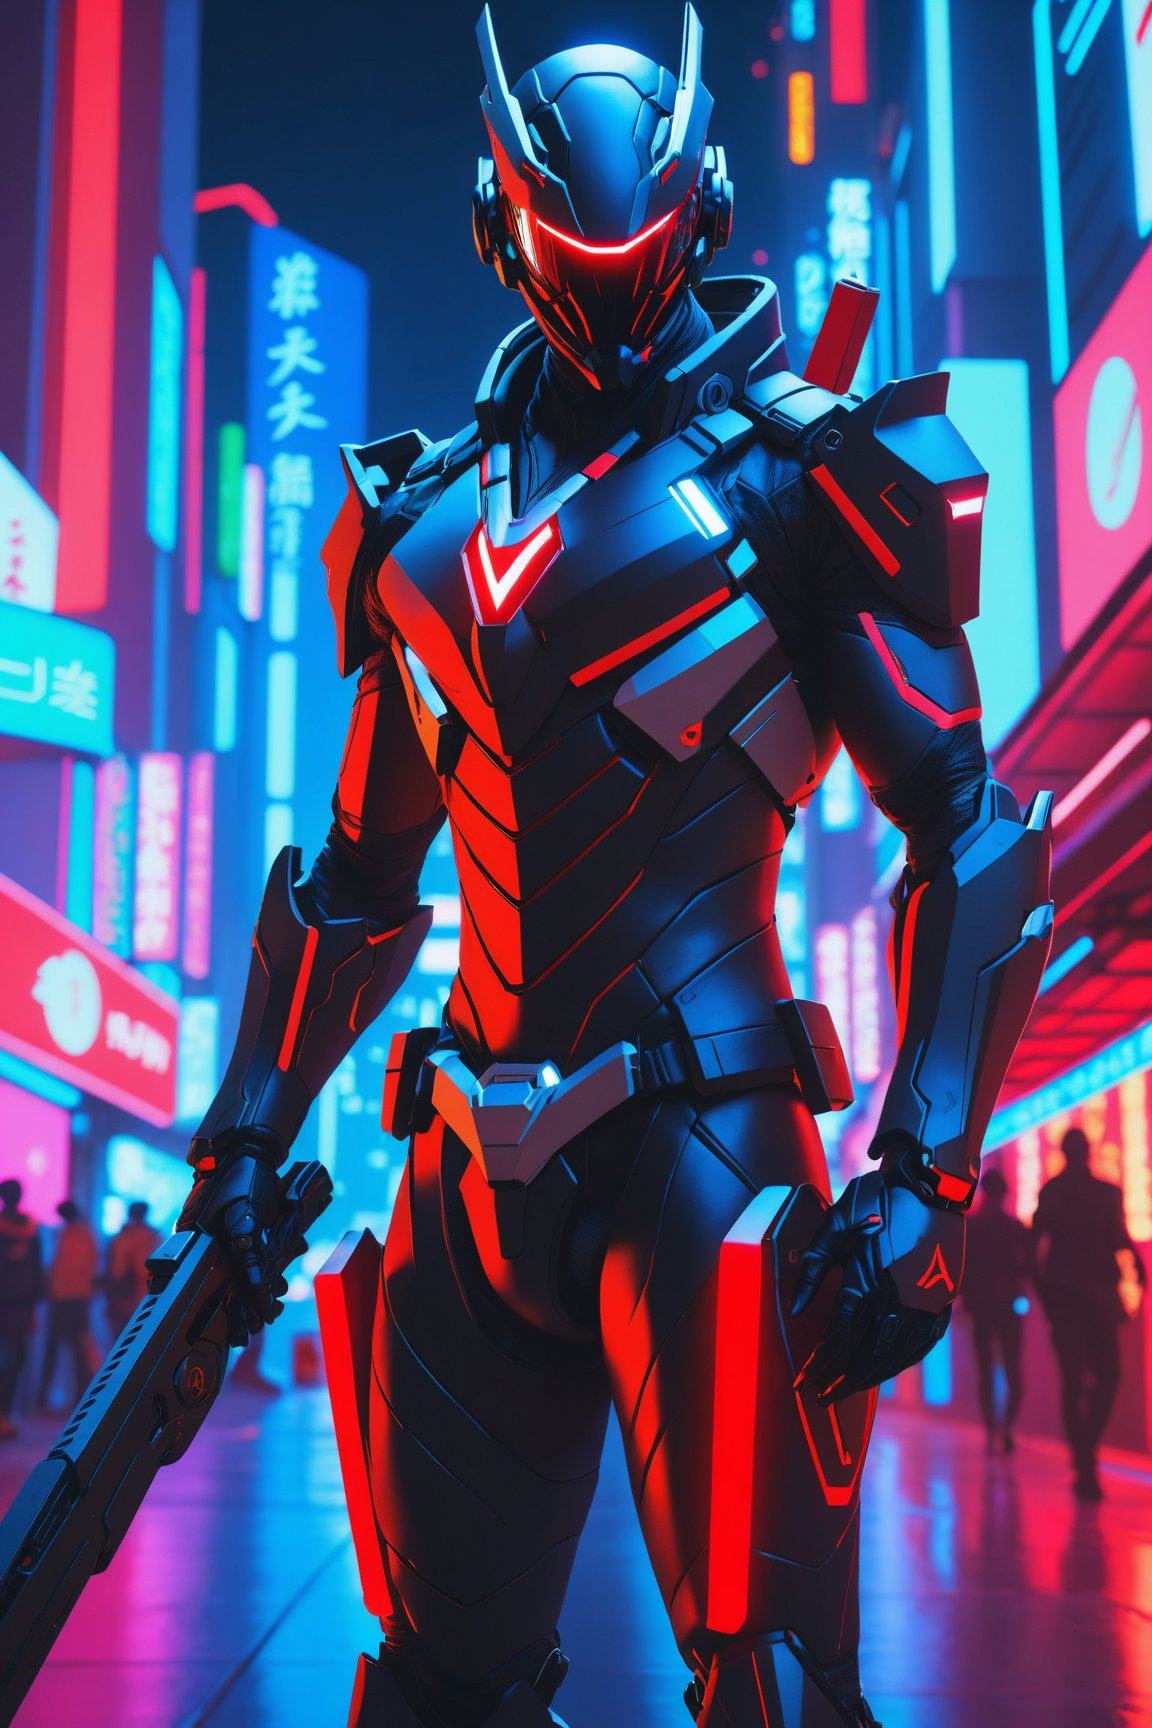 Genji Overwatch Black And Red, featuring a black and red color scheme, the scene is set in a futuristic cyberpunk cityscape, with neon lights illuminating the surroundings, a futuristic man in a futuristic suit standing in a futuristic city at night with neon lights on his chest, Eve Ryder, rossdraws global illumination, cyberpunk art, retrofuturism